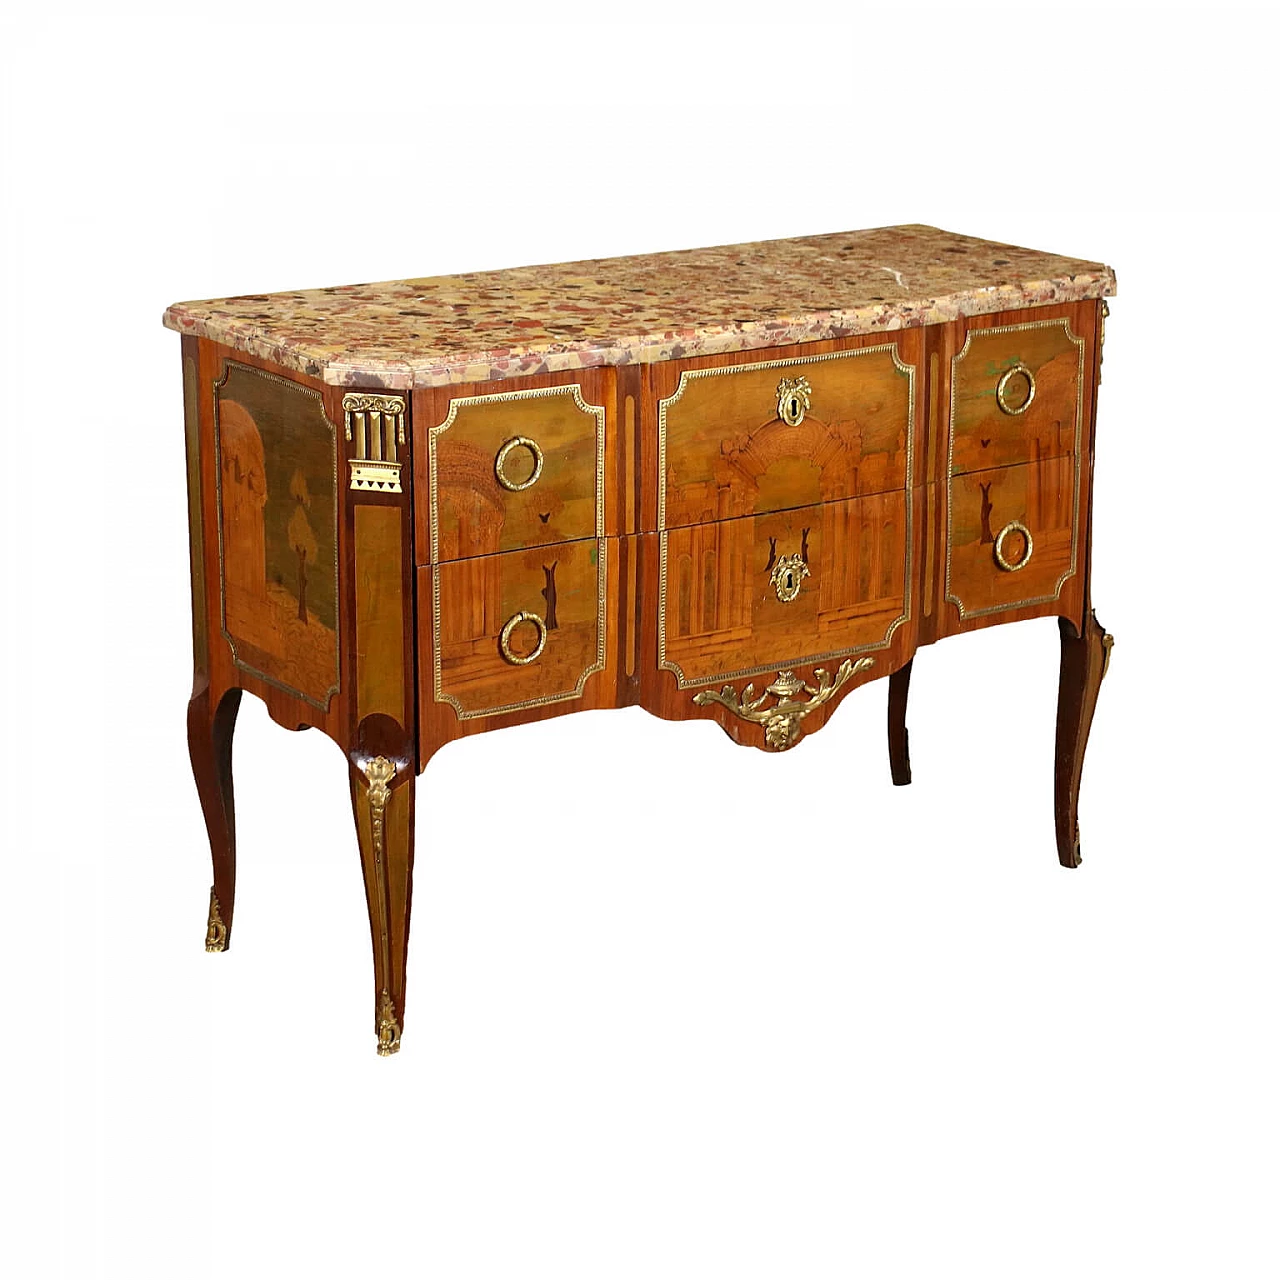 Neoclassical inlaid dresser by André Louis Gilbert, late 18th century 1